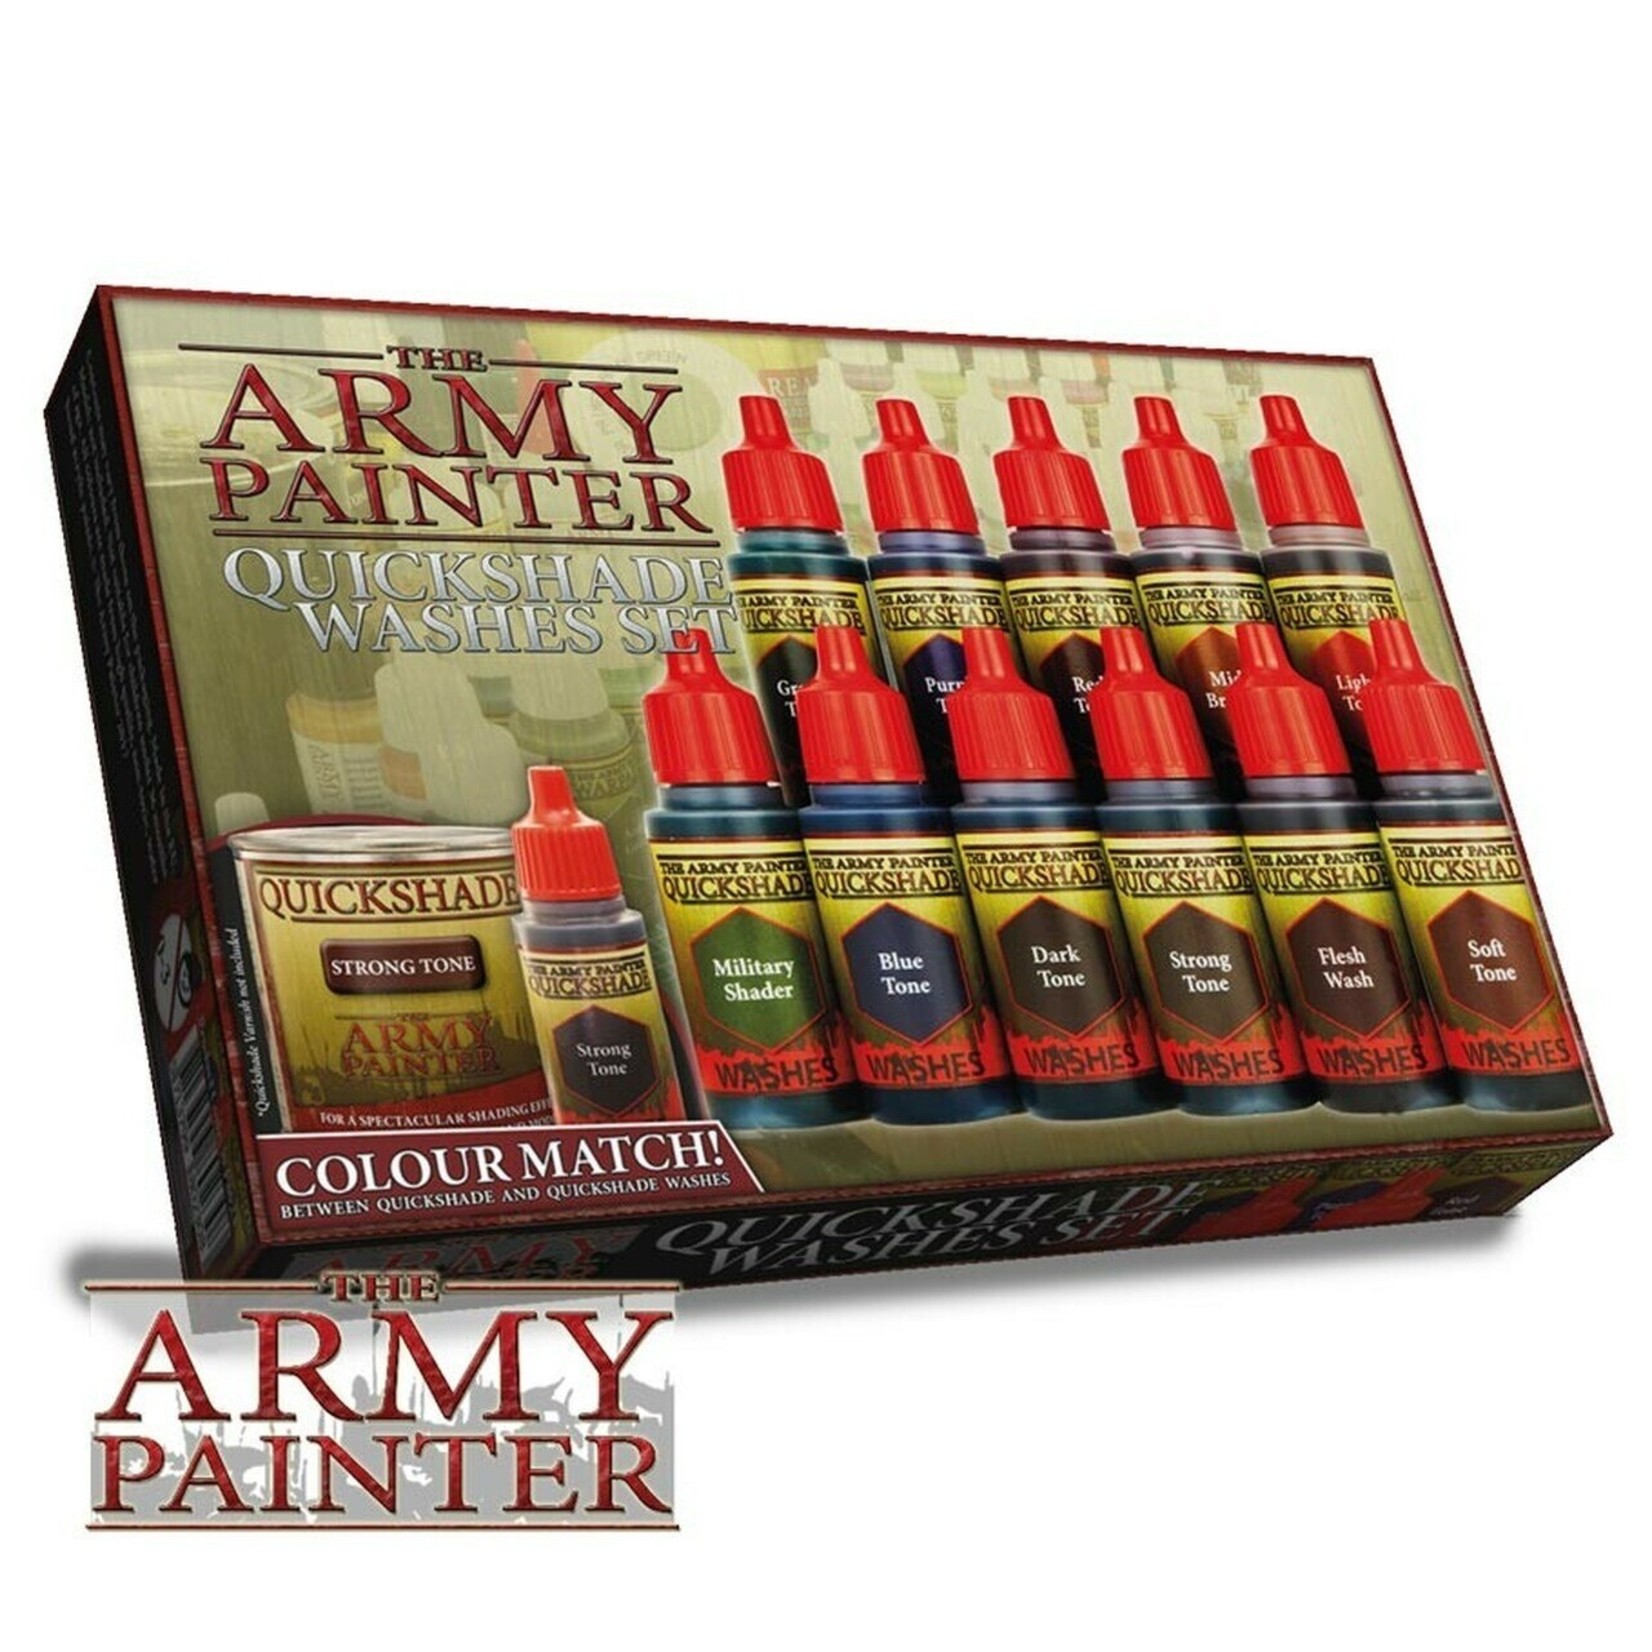 Army Painter Army Painter Warpaints Quickshade Washes Set